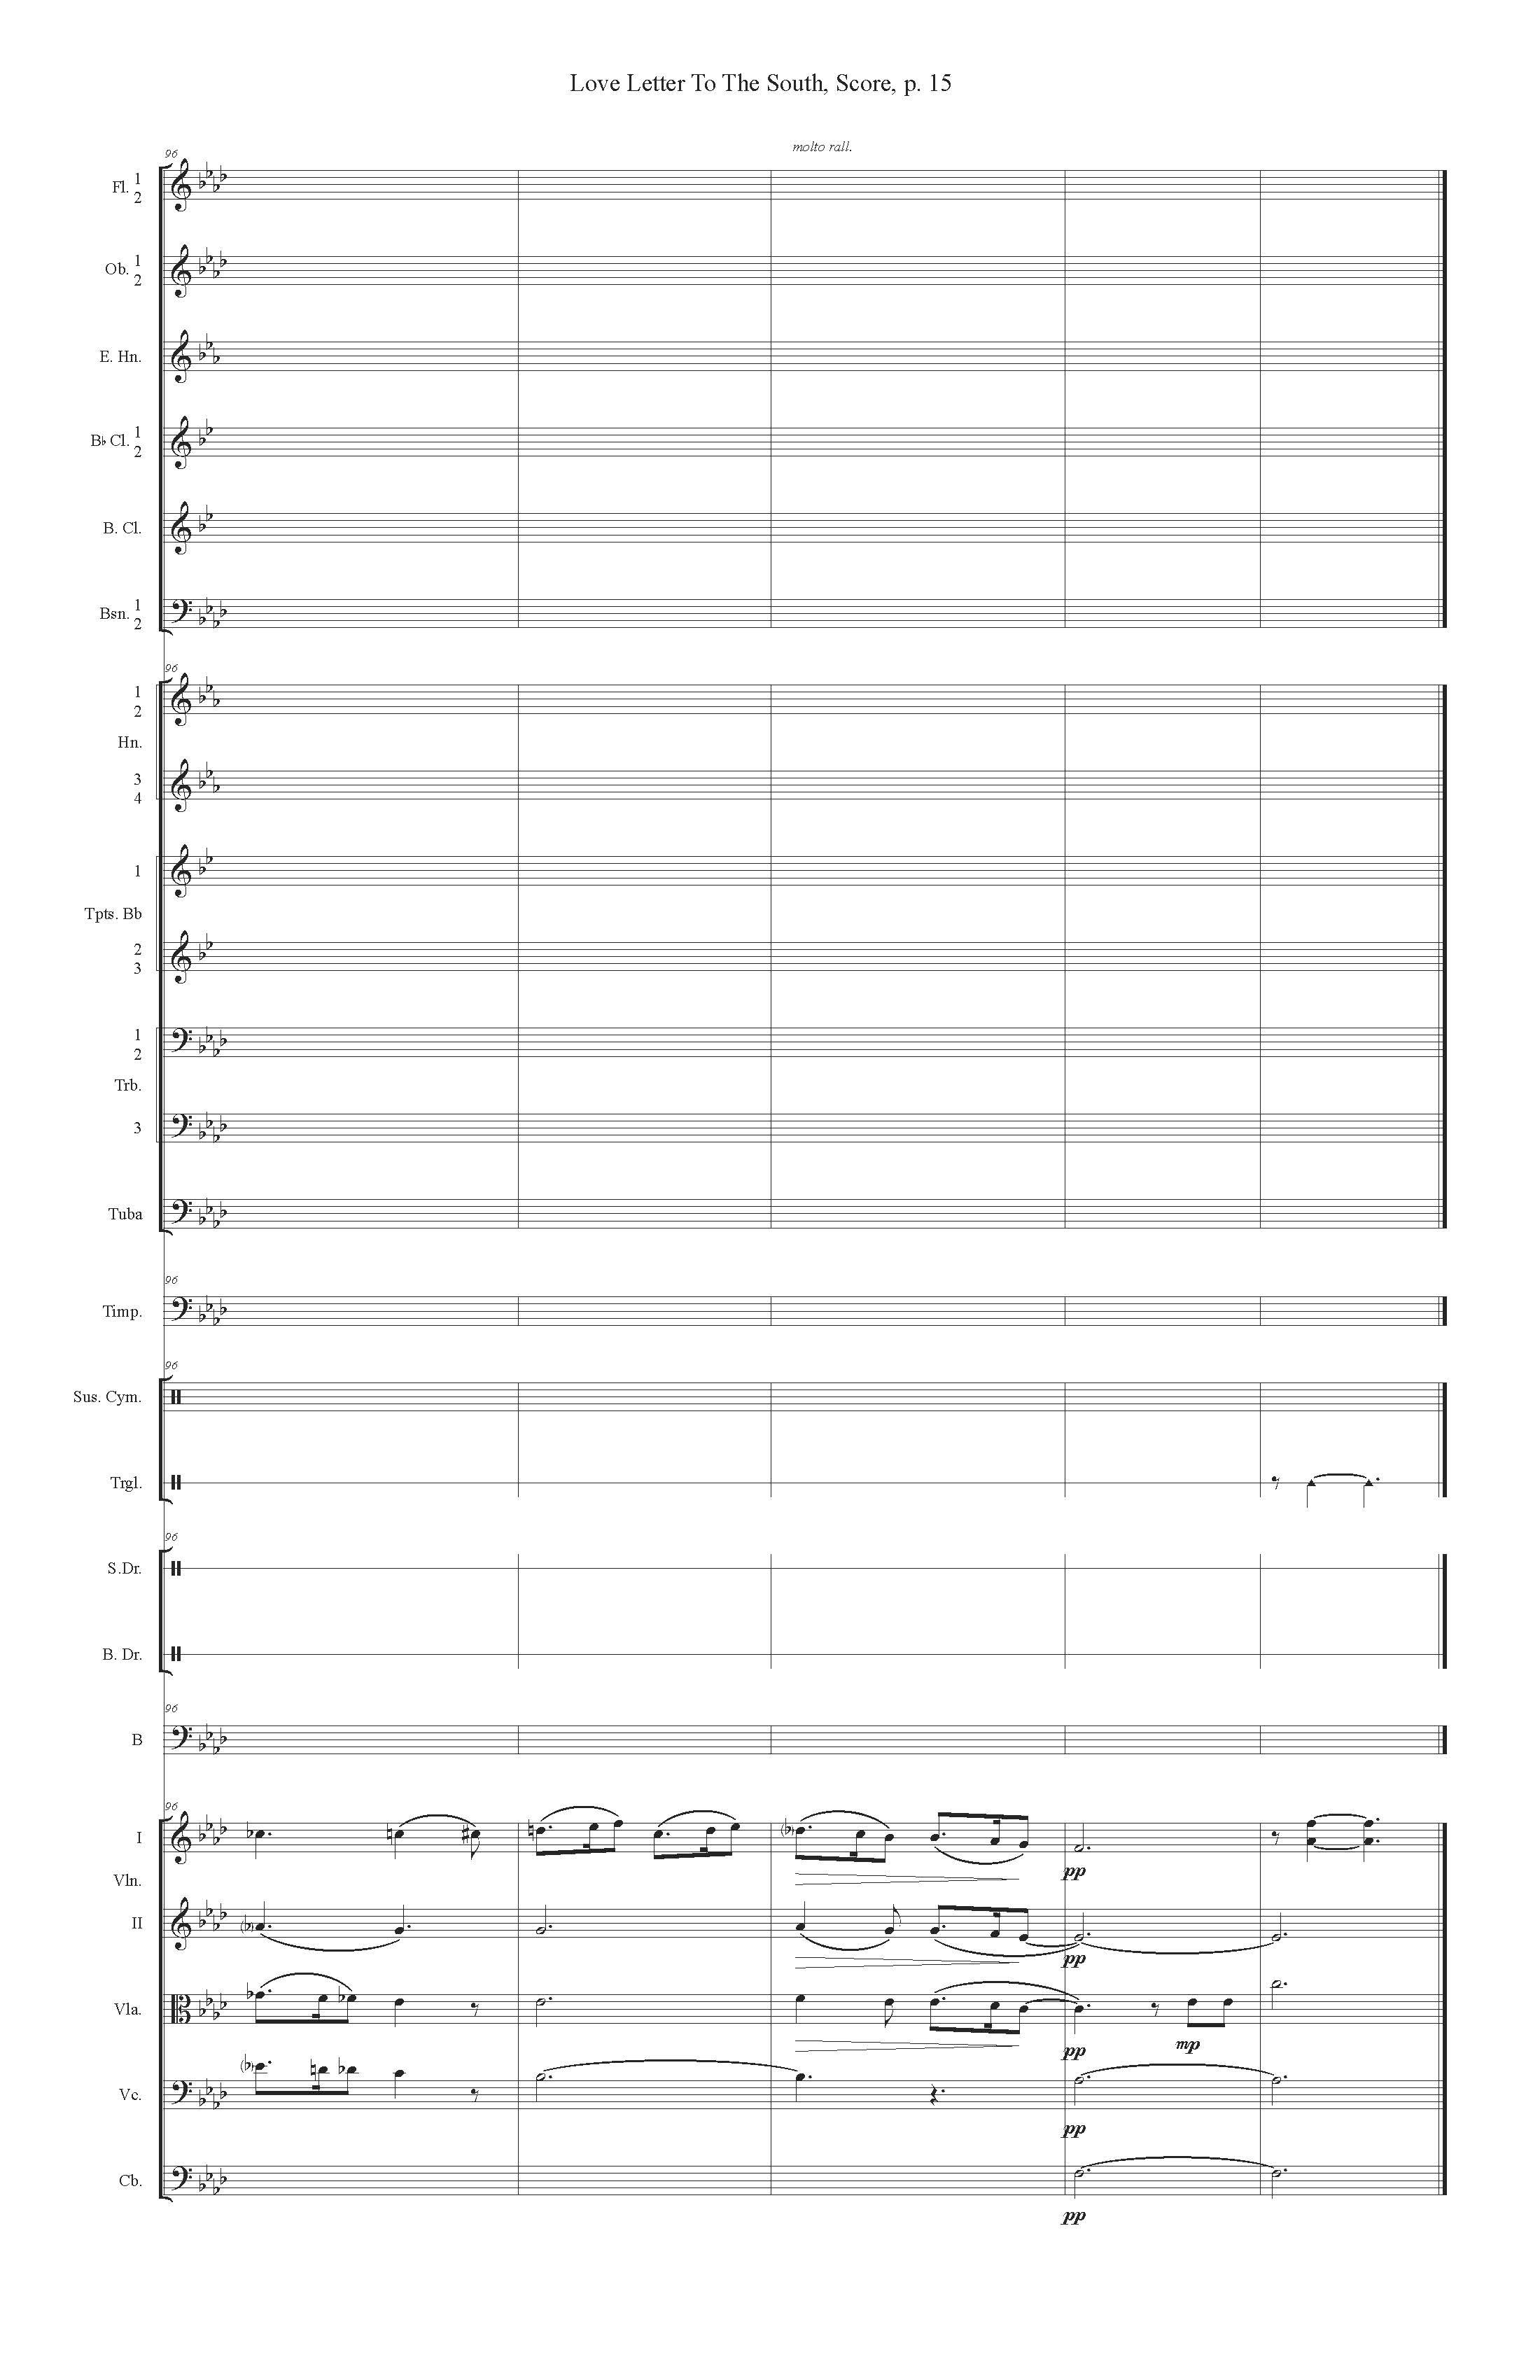 LOVE LETTER TO THE SOUTH ORCH - Score_Page_15.jpg